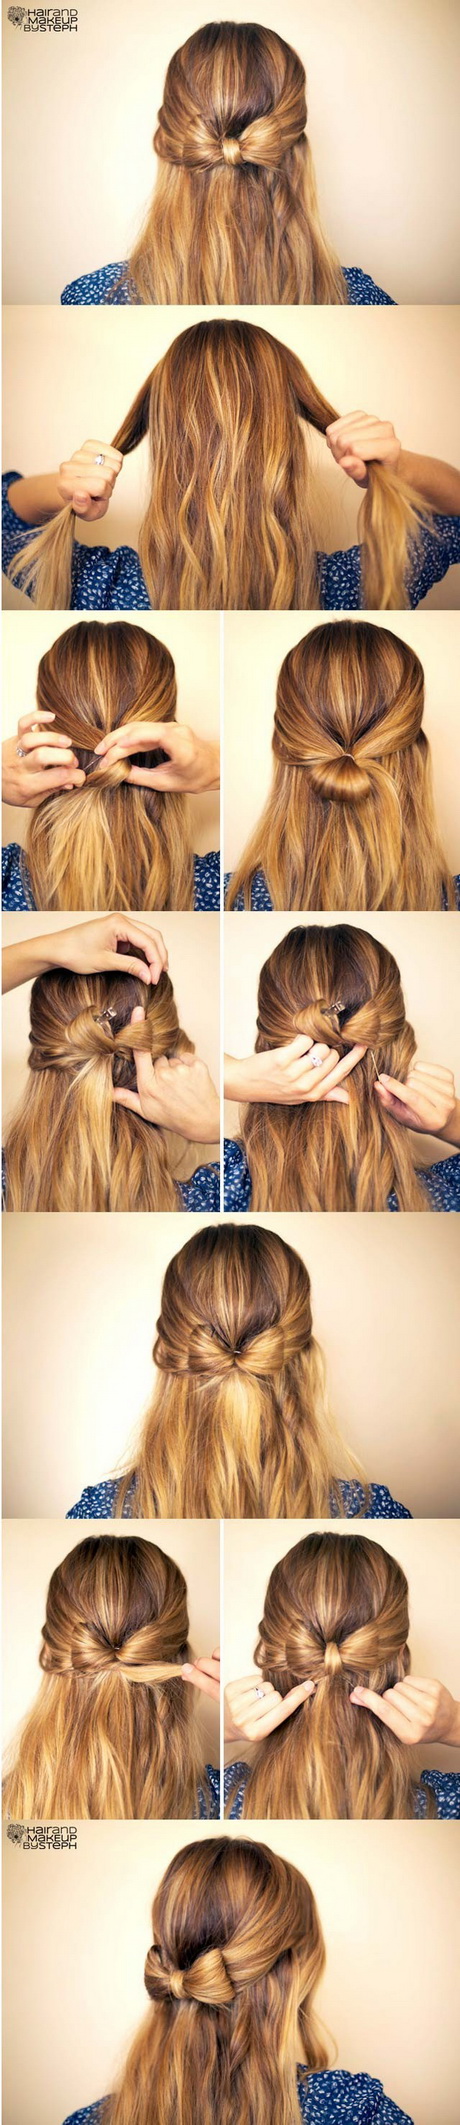 Simple hairstyle for long hair simple-hairstyle-for-long-hair-56-15